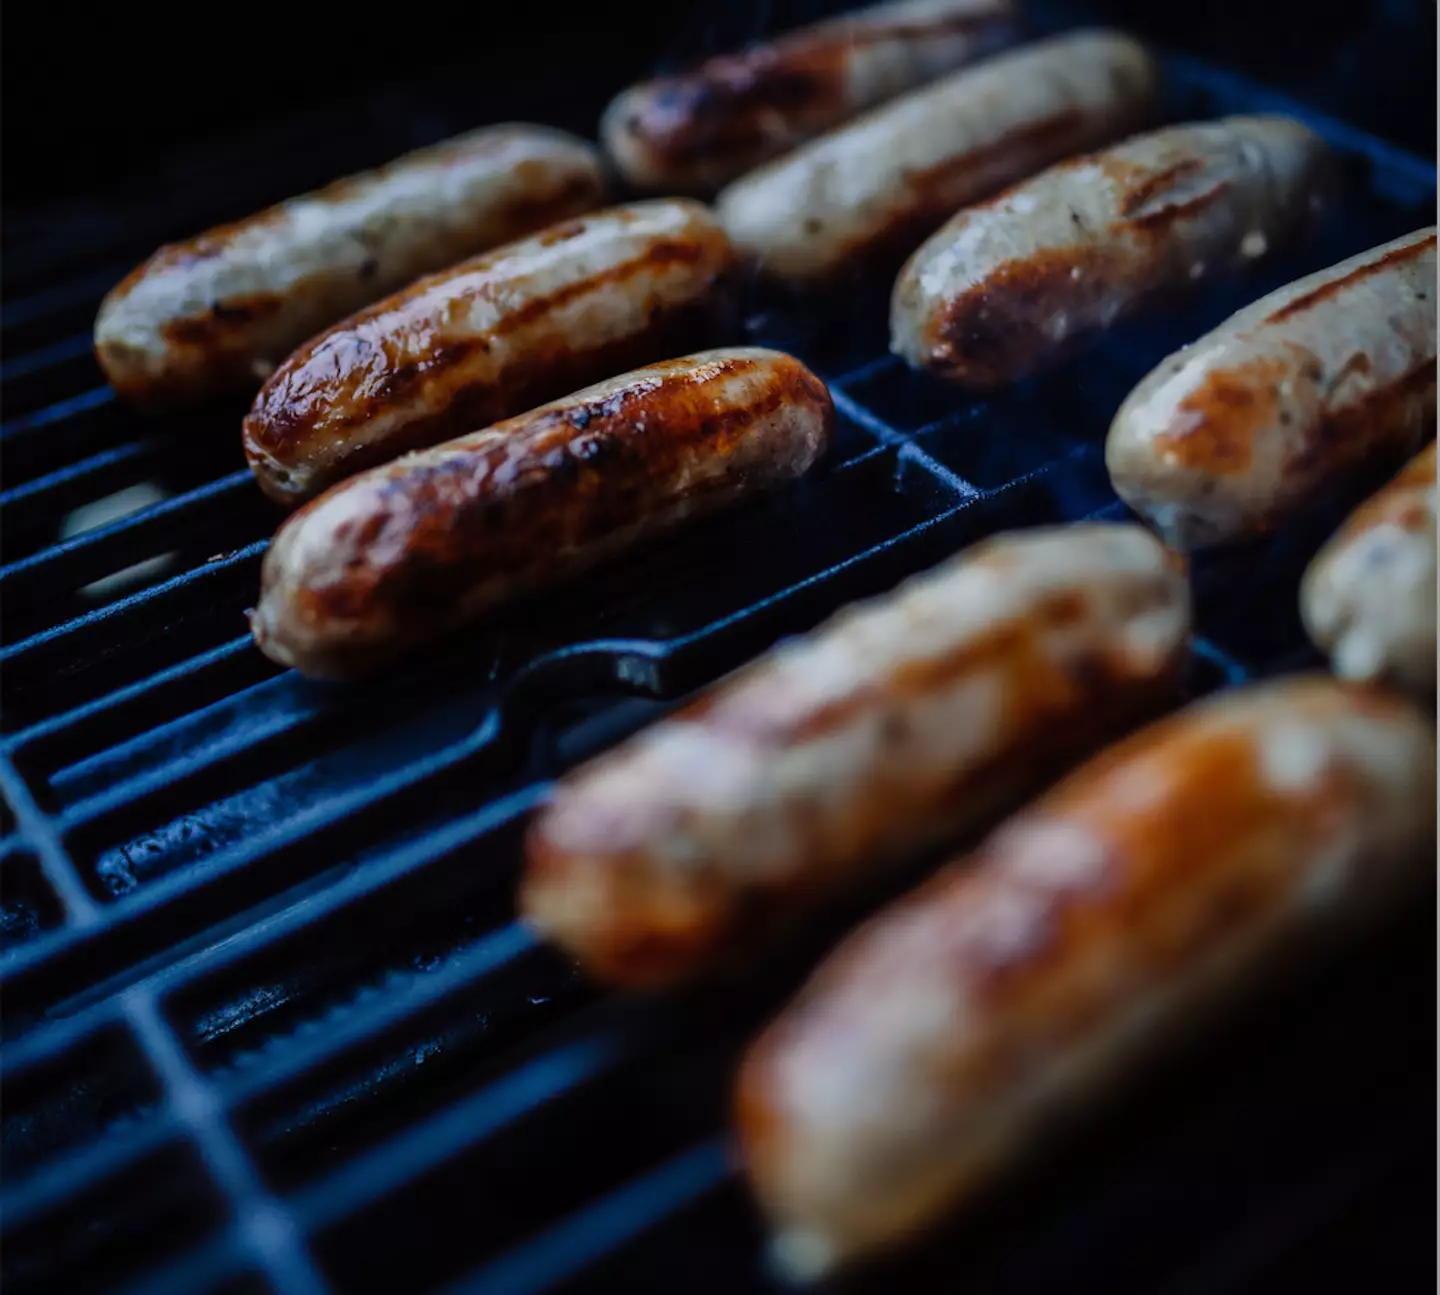 Ever fancied chocolatey sausages? Now's your chance (